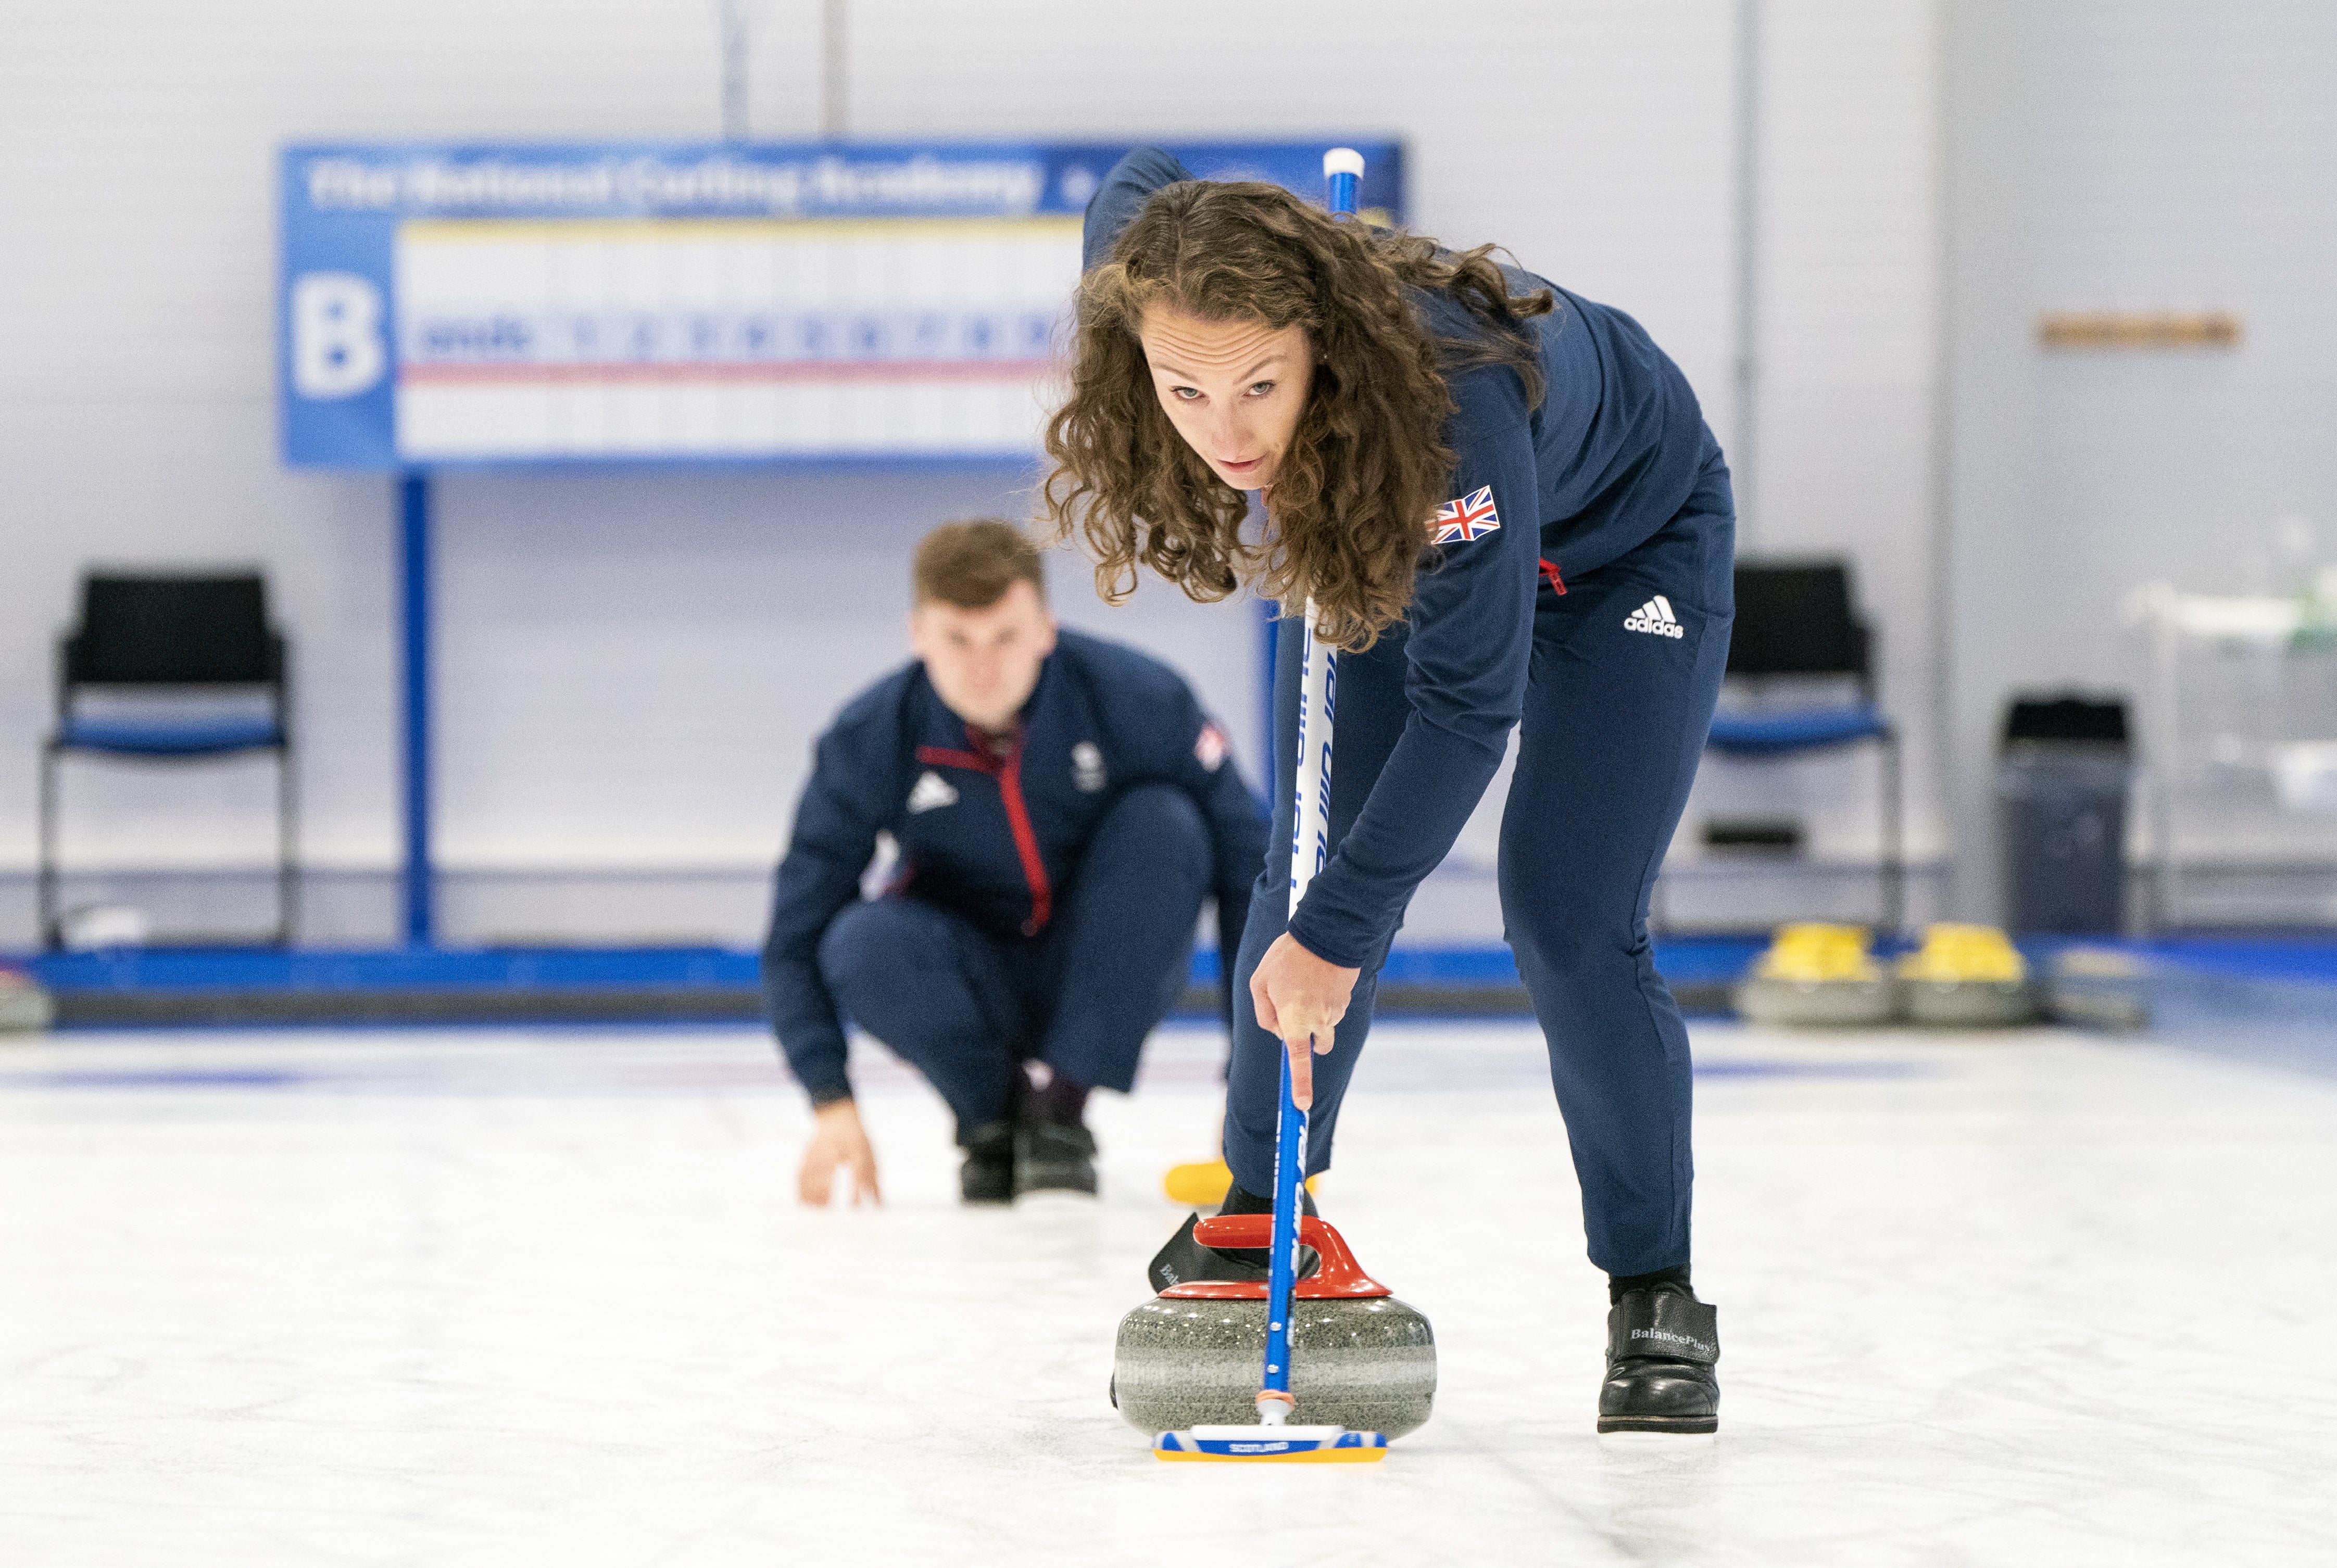 Jennifer Dodds and Bruce Mouat get the mixed curling event underway on Wednesday